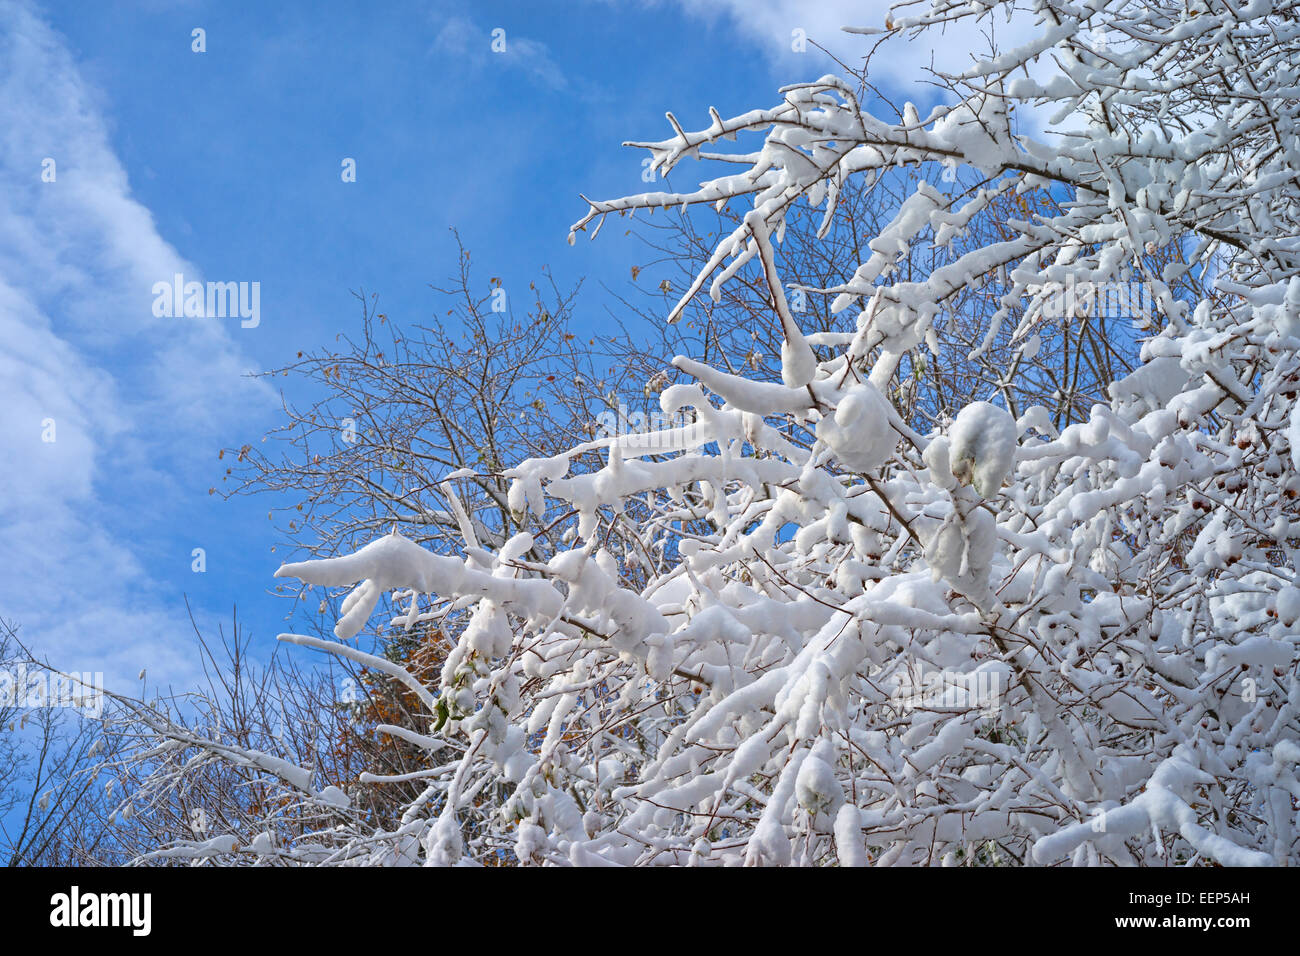 White fluffy snow covering thin branches of a tree with a bright blue sky and wispy clouds above. Stock Photo